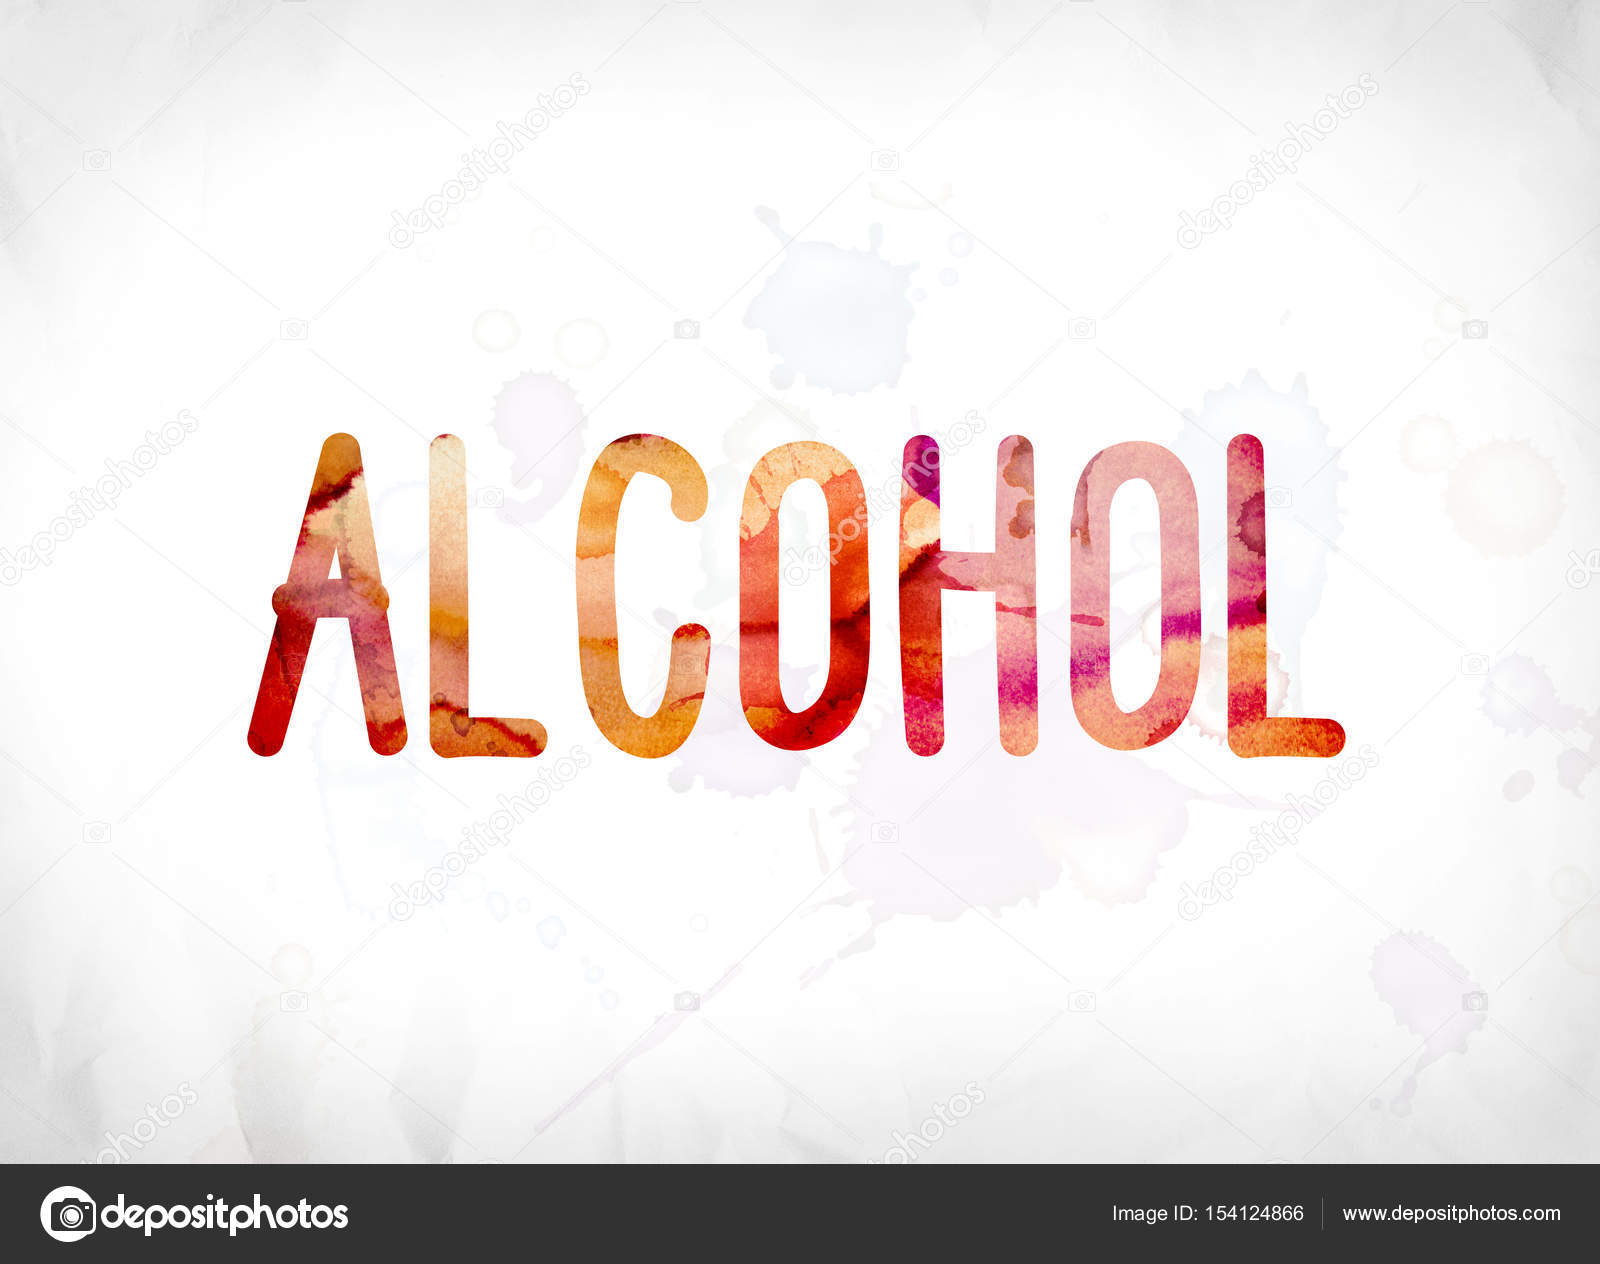 alcohol-word-search-printable